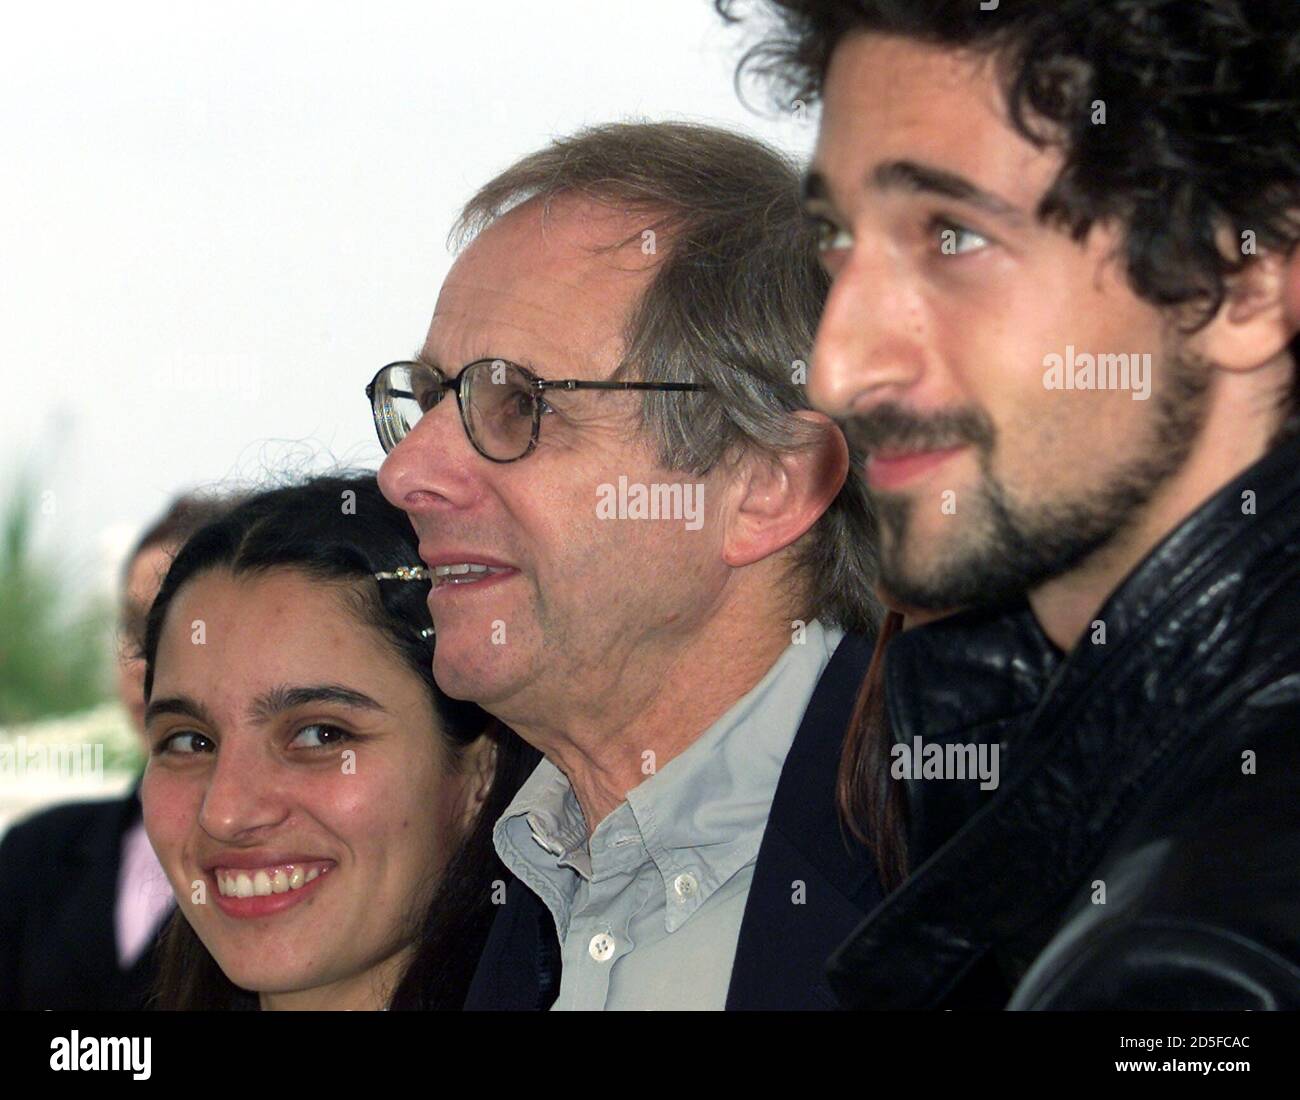 British director Ken Loach (C) stands between Mexican actress Pilar Padilla  (L) and American actor Adrien Brody (R) during a photo call, May 11. Loach's  film "Bread and Roses" is screened in